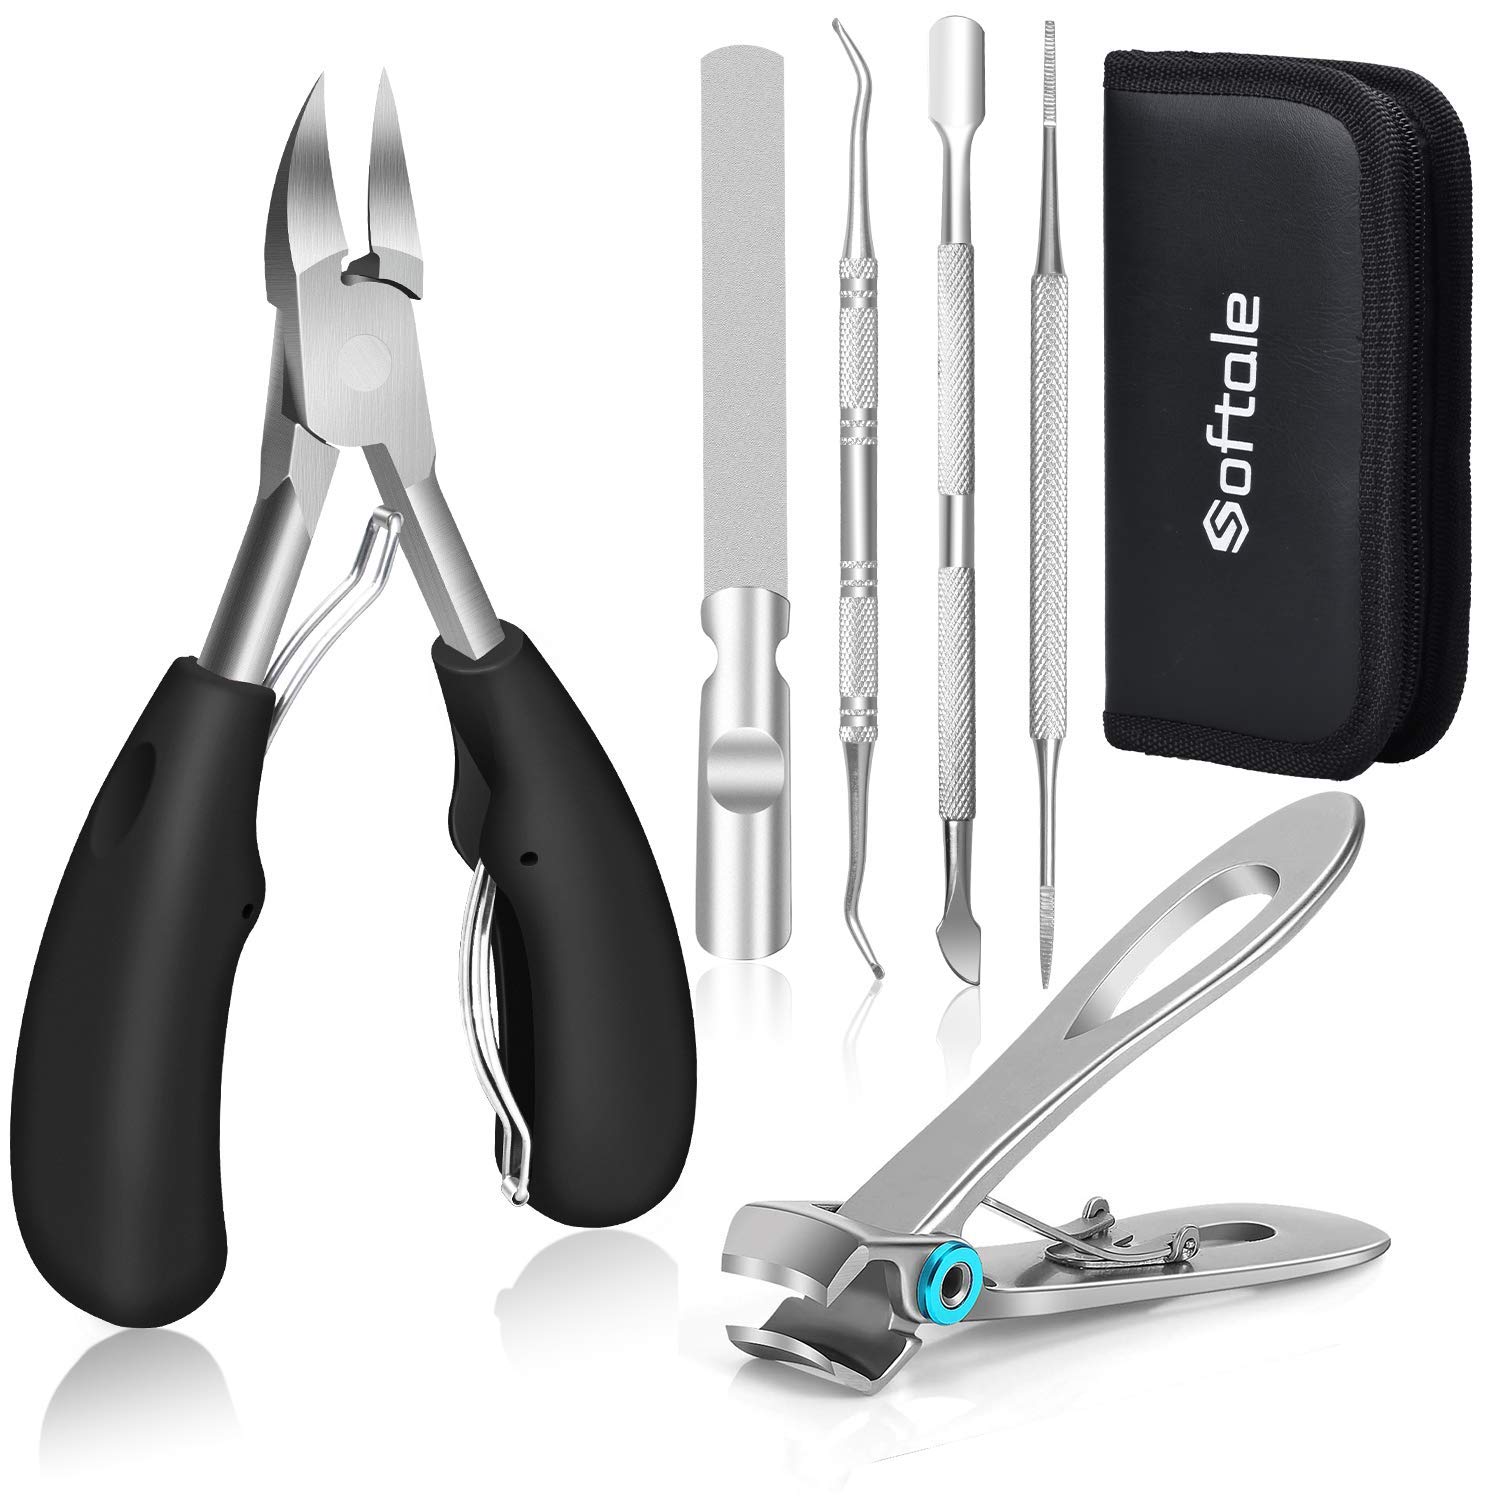  Toenail Clippers for Seniors Thick Toenails, Toe Nail Clippers  Adult Thick Nails Long Handle, Professional Heavy Duty Nail Clippers 6Pcs  Black : Beauty & Personal Care